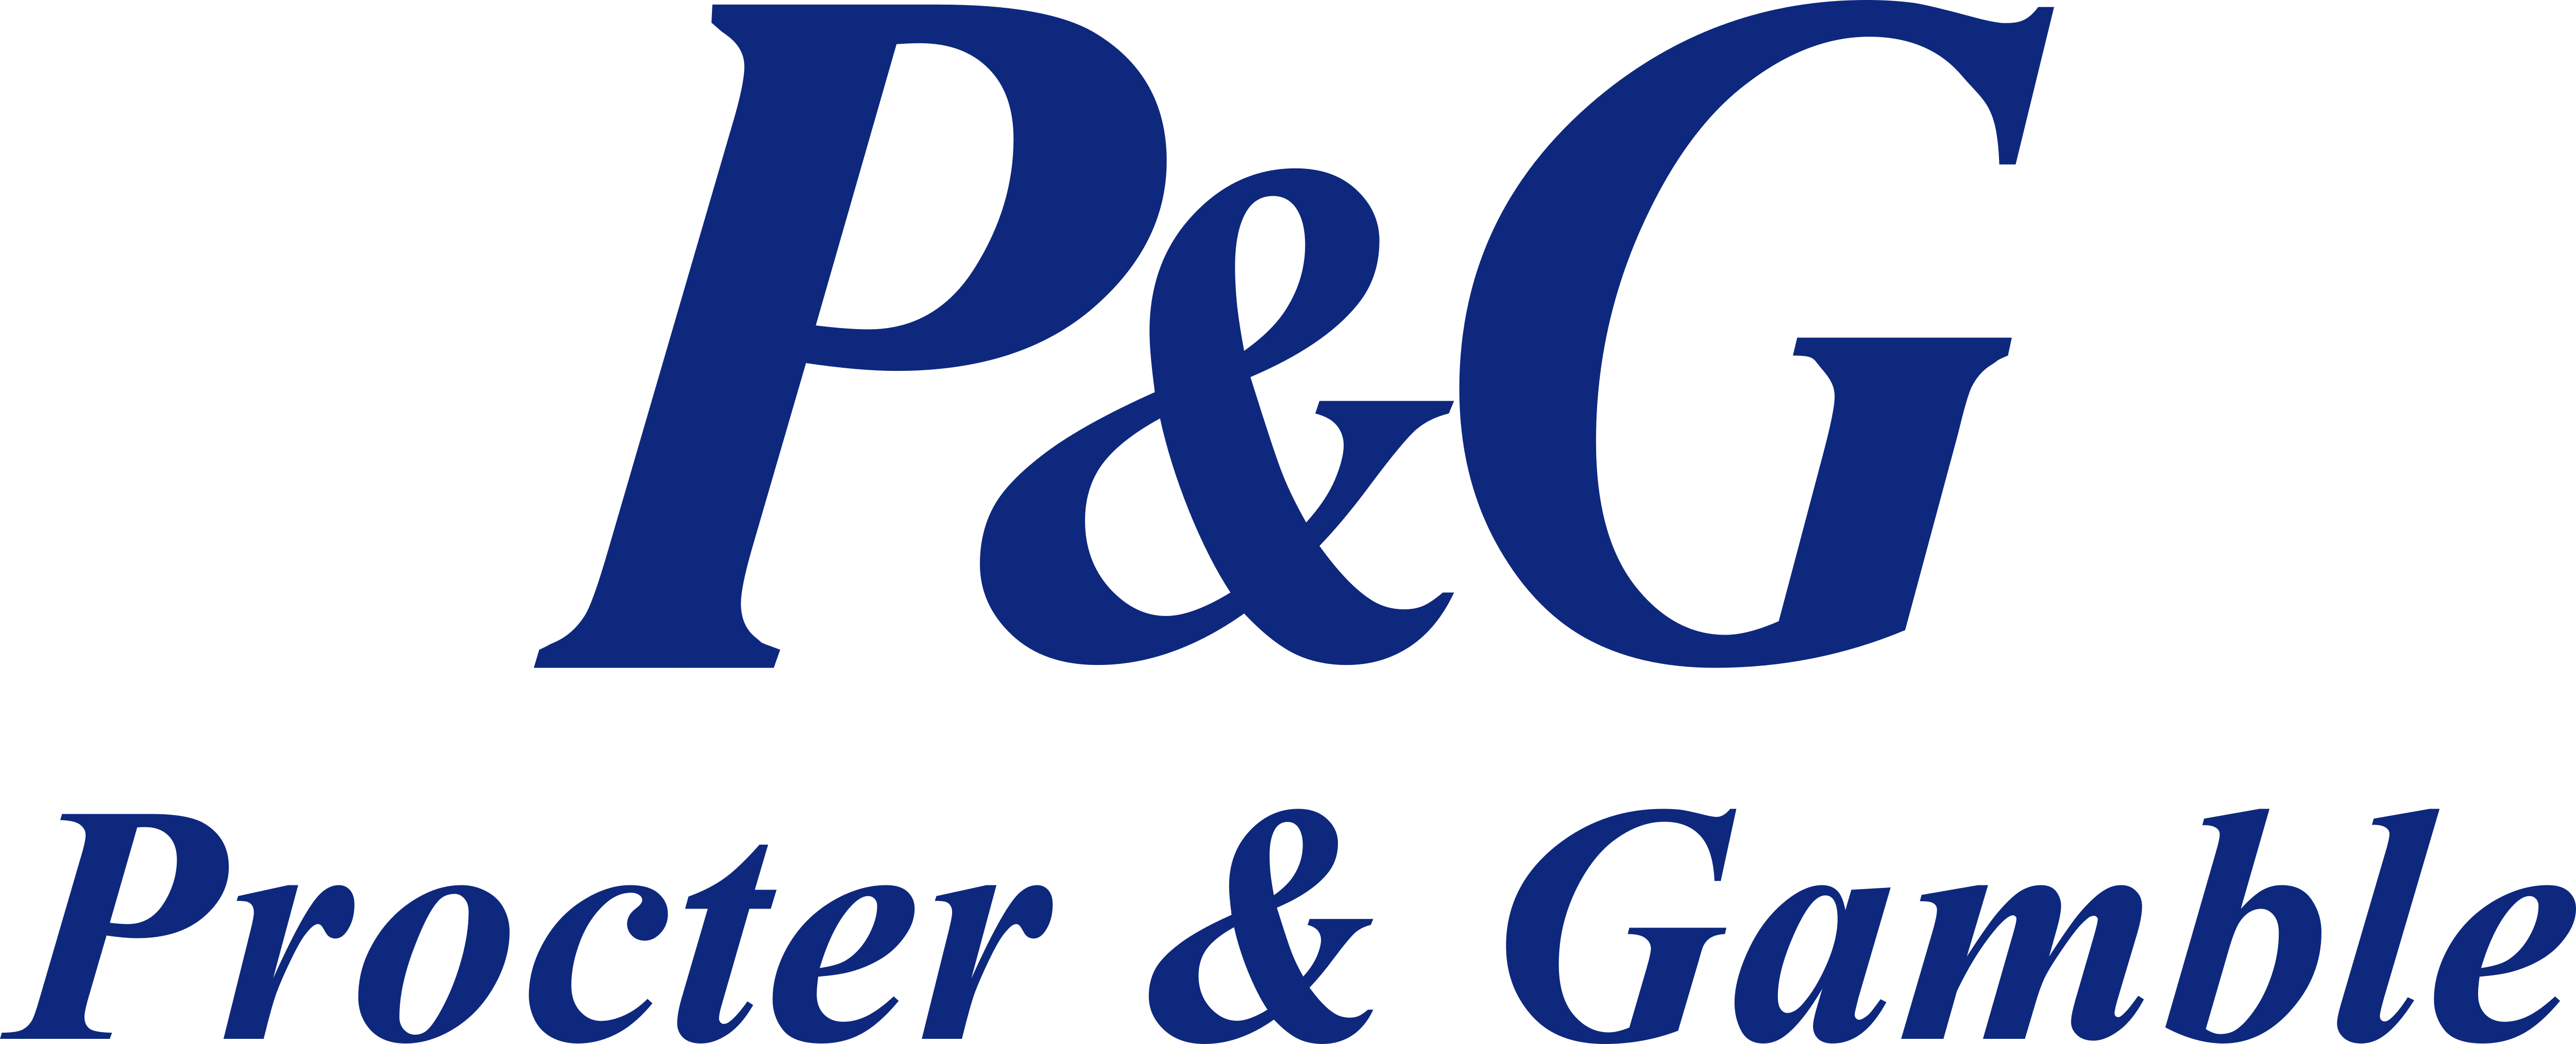 proctor and gamble logo